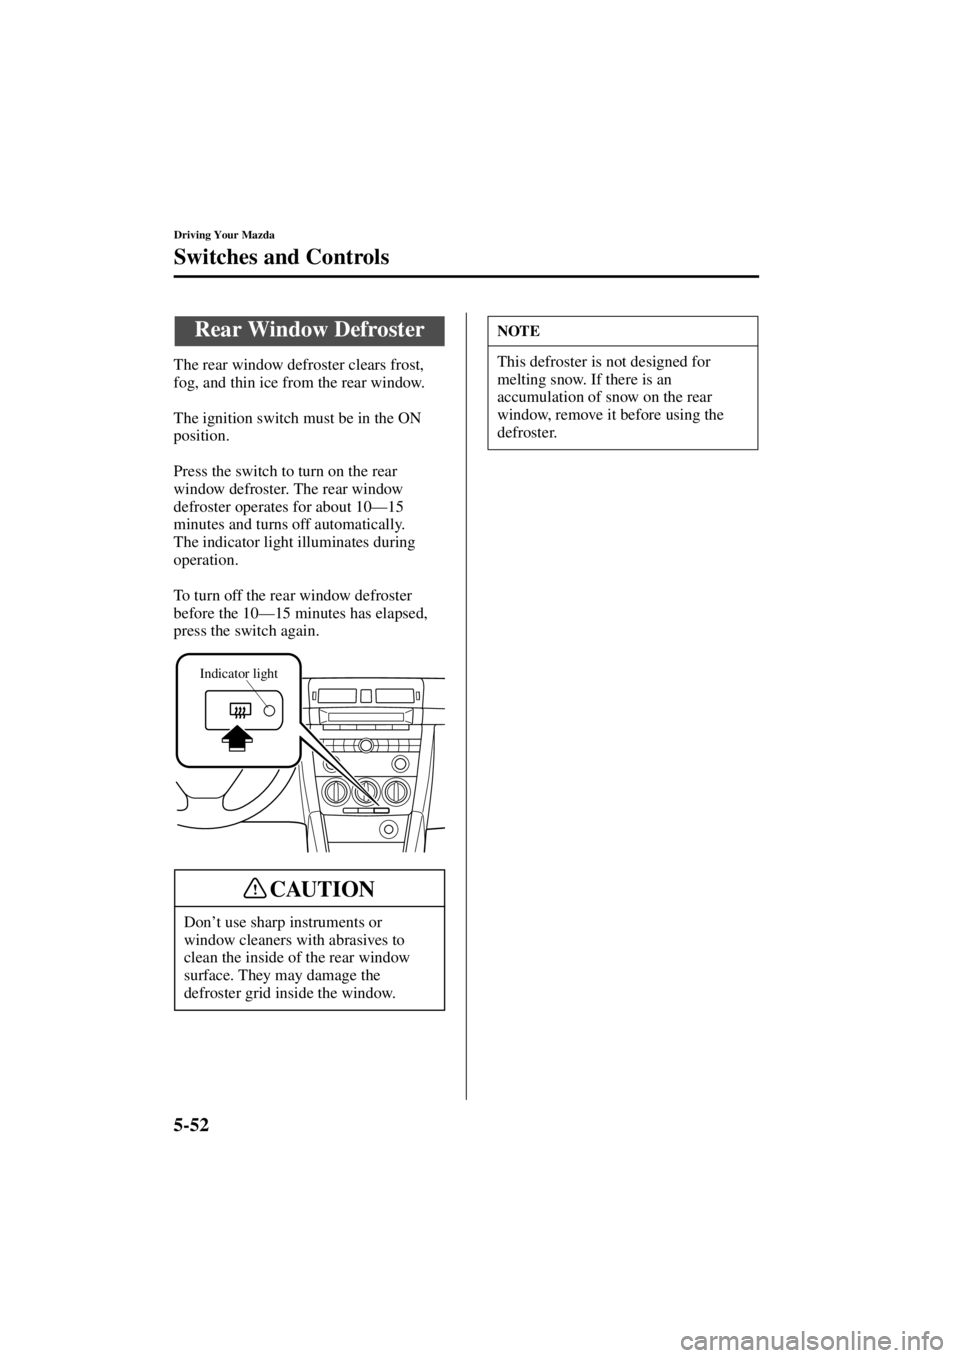 MAZDA MODEL 3 5-DOOR 2004  Owners Manual 5-52
Driving Your Mazda
Switches and Controls
Form No. 8S18-EA-03I
The rear window defroster clears frost, 
fog, and thin ice from the rear window.
The ignition switch must be in the ON 
position.
Pre